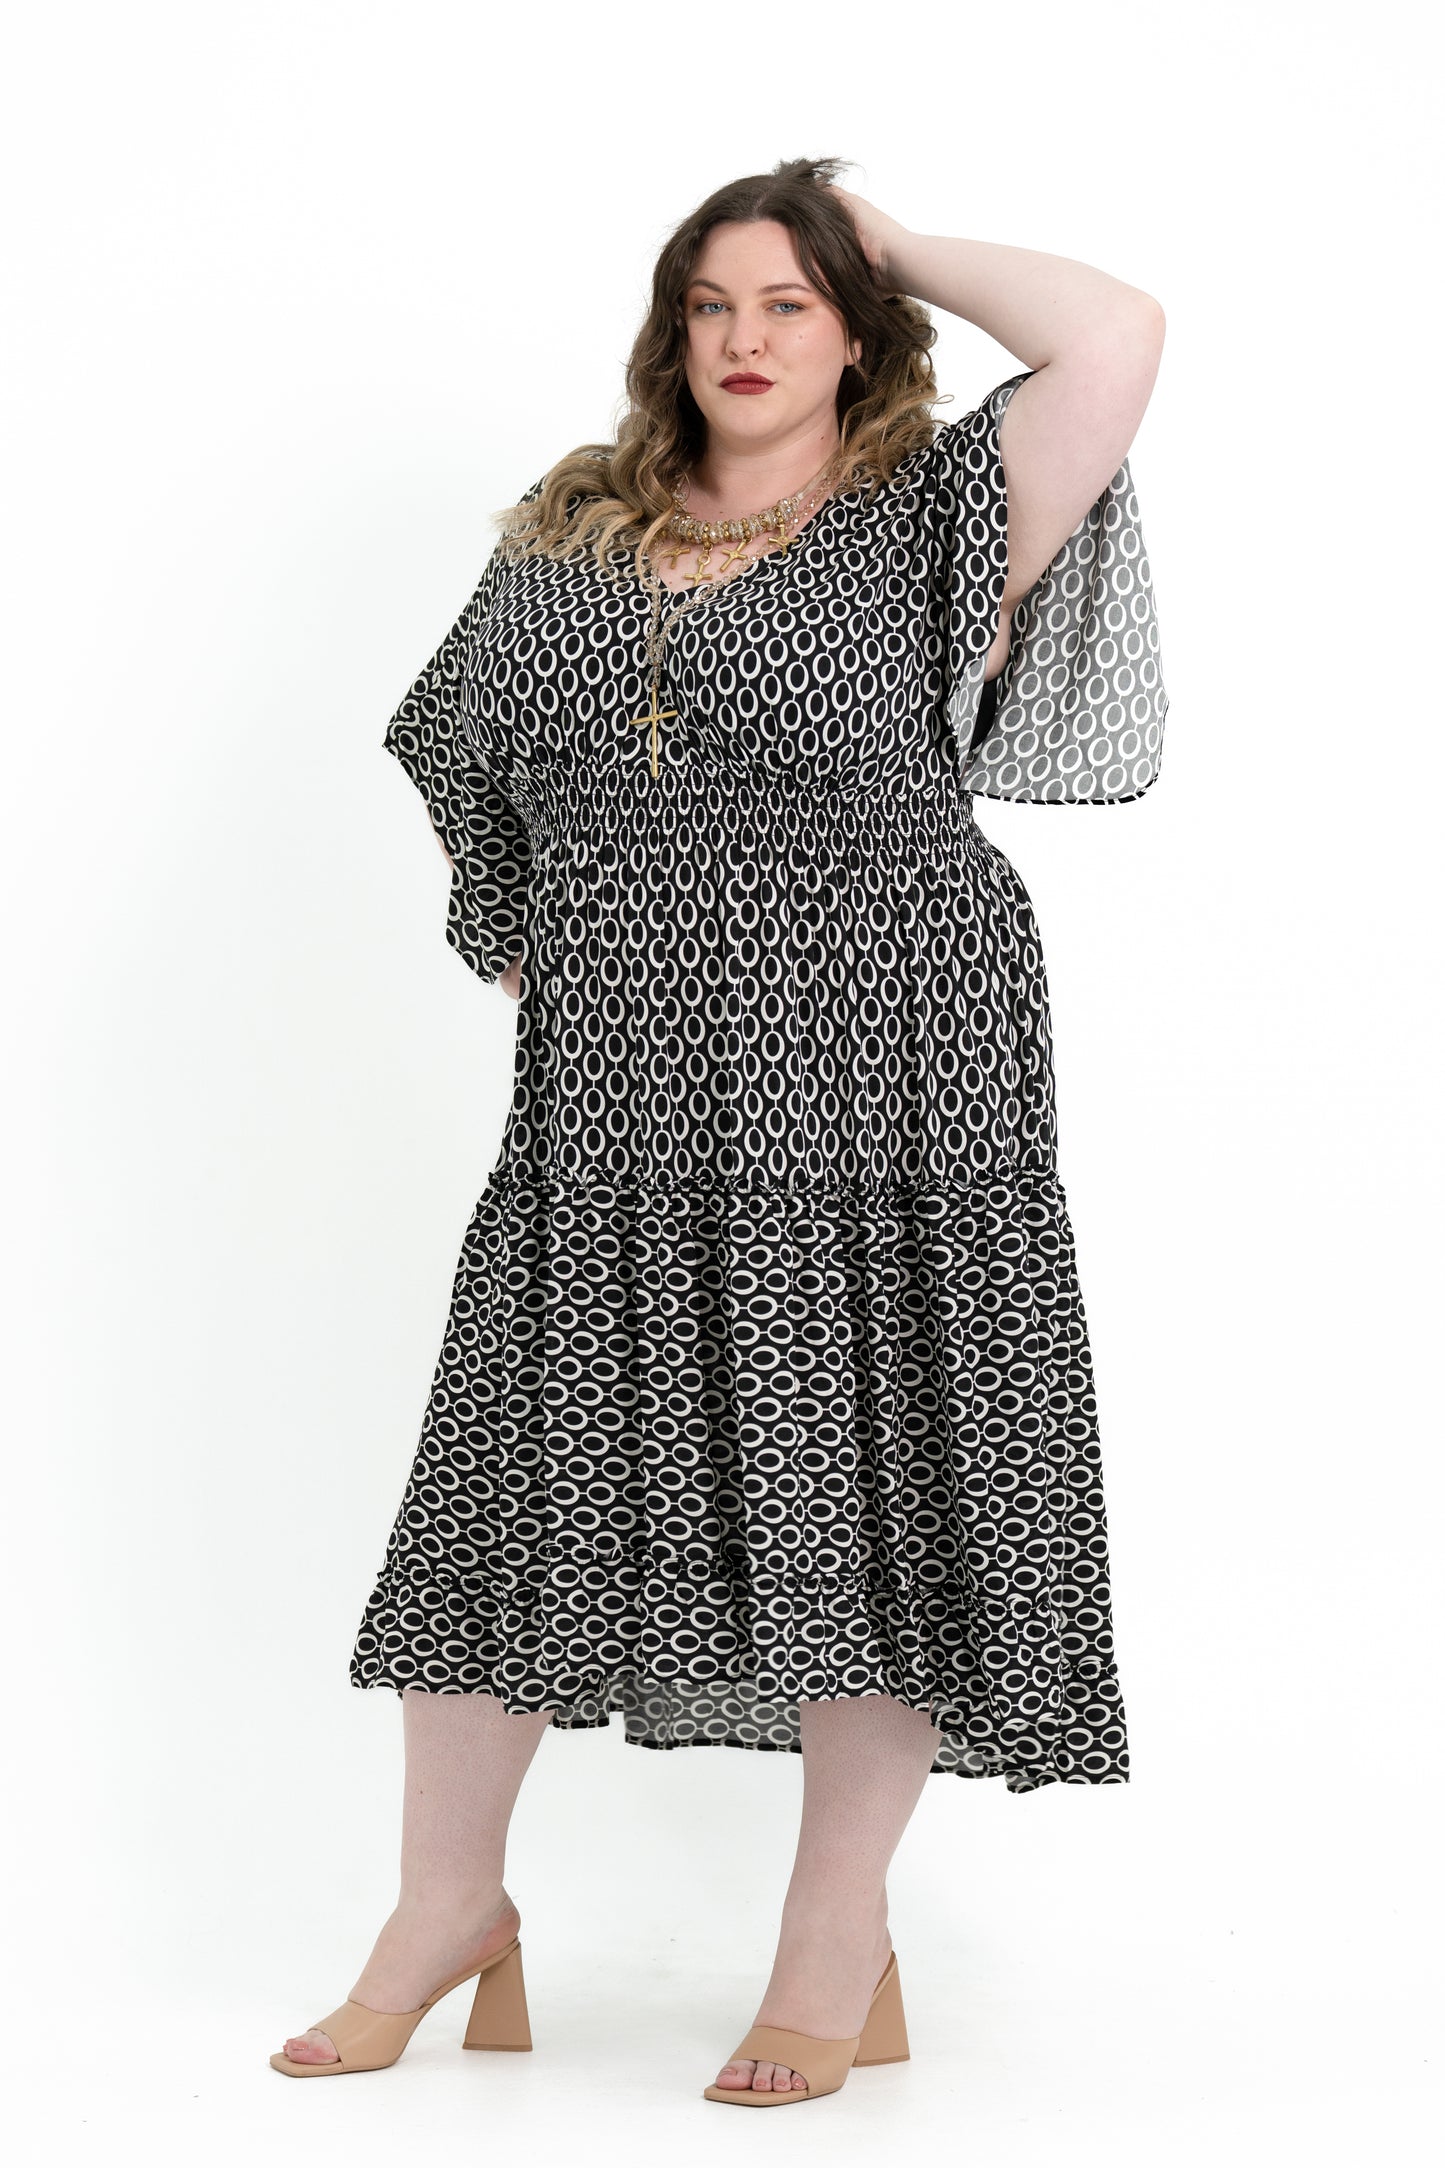 'WHIMSY' Tiered Dress - OVALS Print